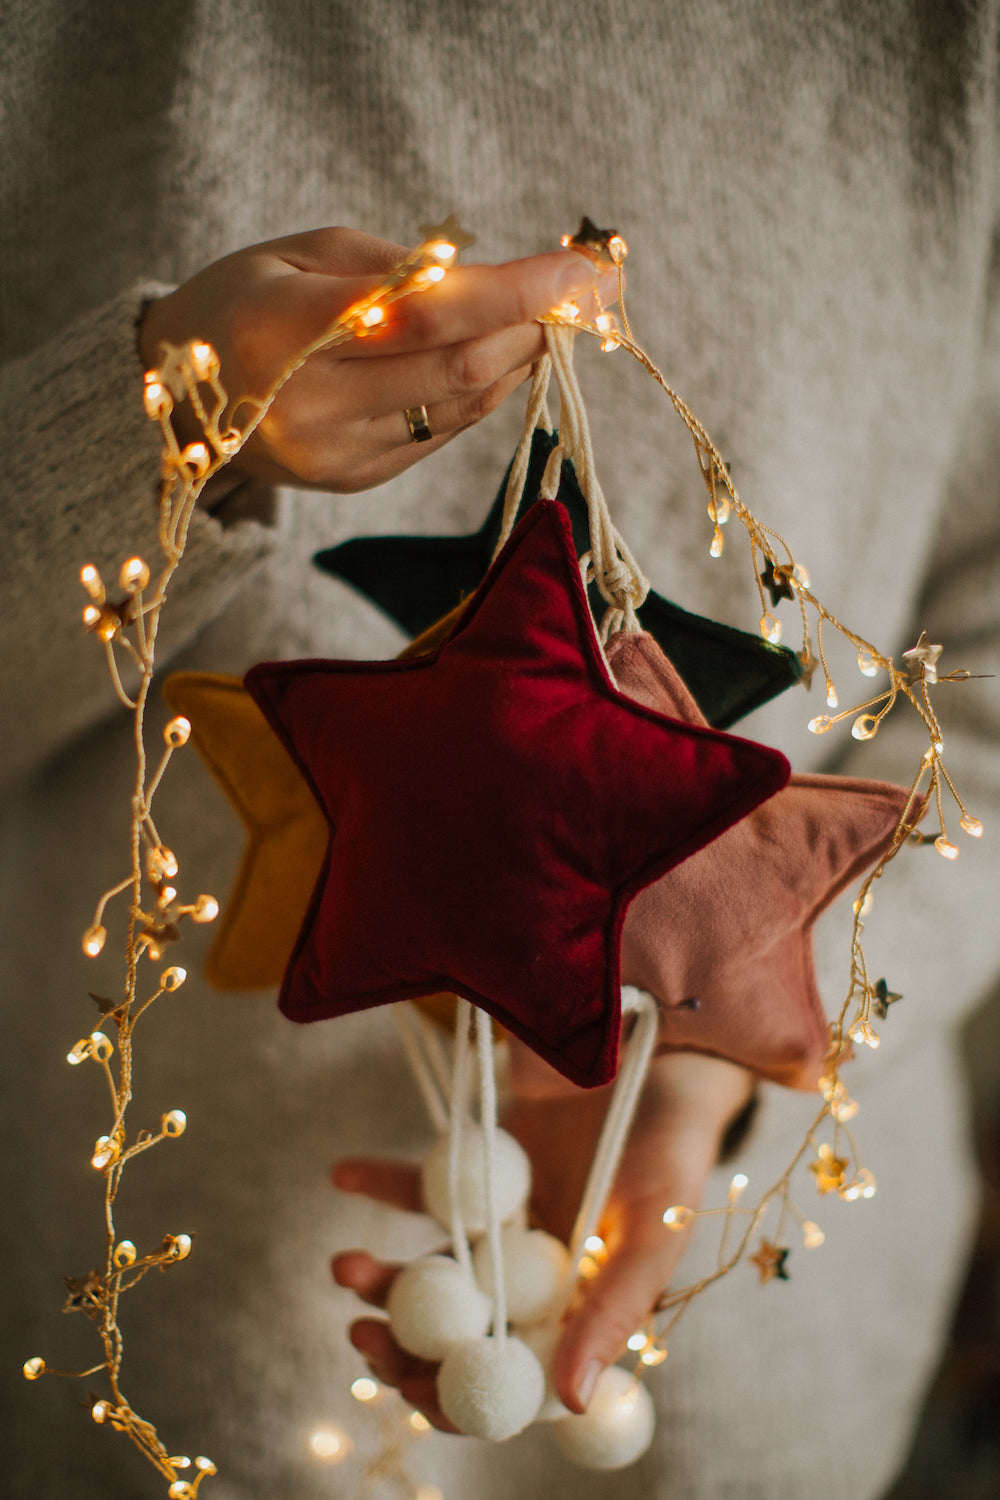 velvet little star pendants wine red by bettys home held by a woman together with Christmas lights